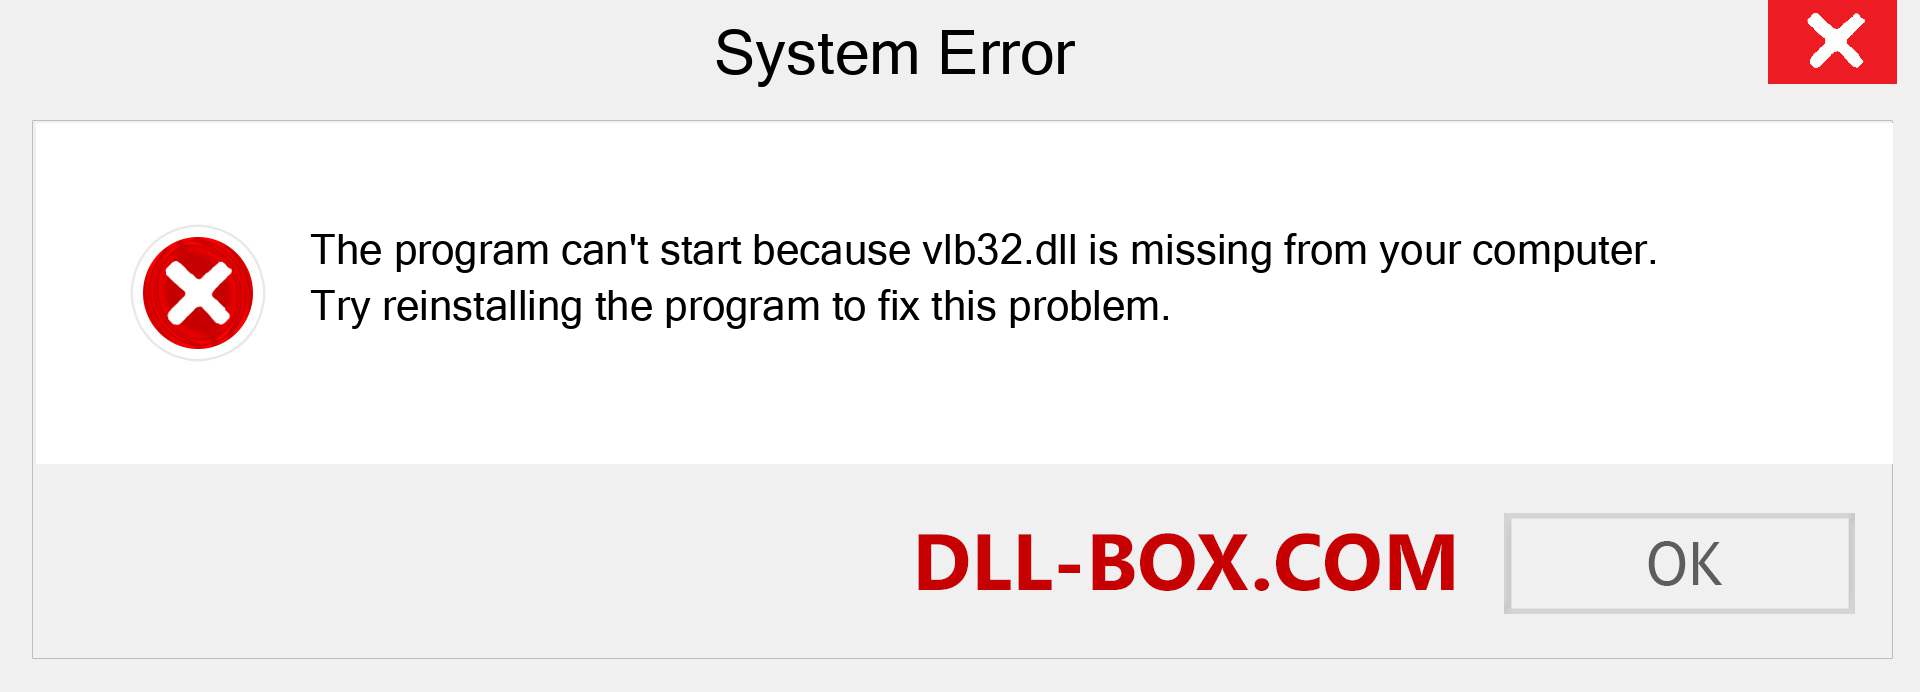  vlb32.dll file is missing?. Download for Windows 7, 8, 10 - Fix  vlb32 dll Missing Error on Windows, photos, images